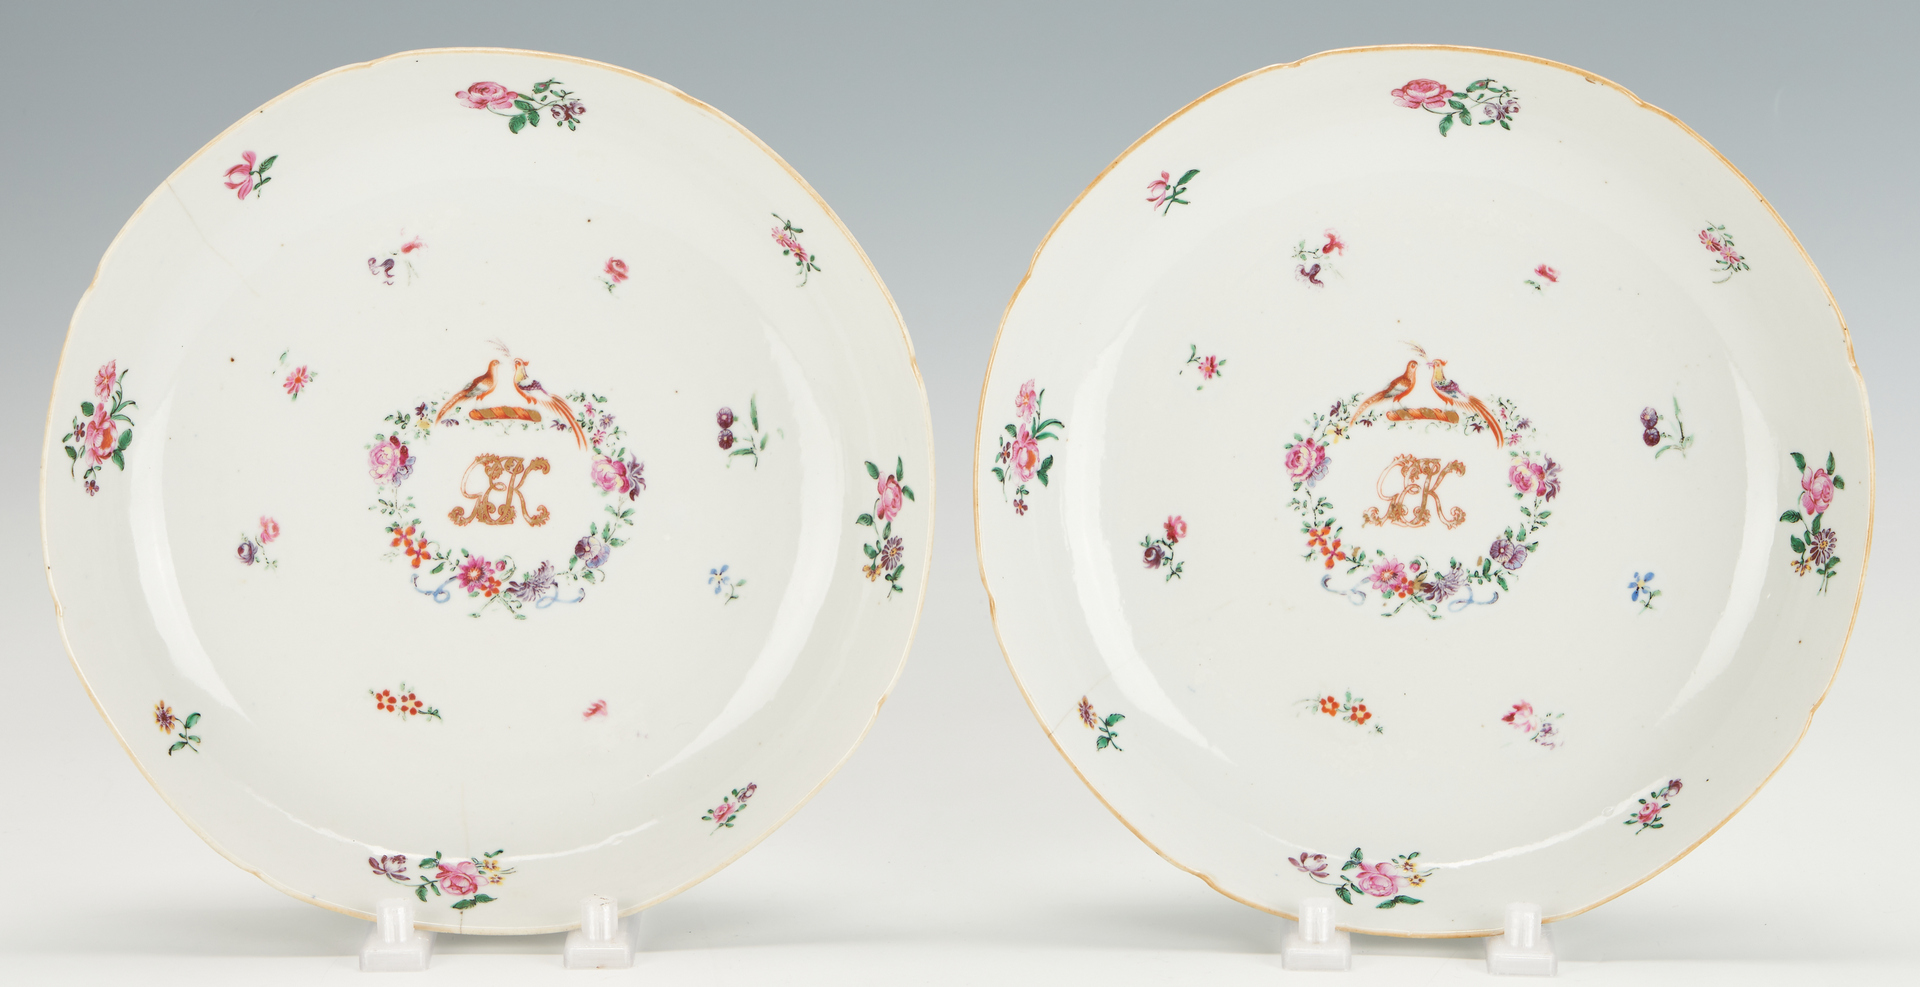 Lot 34: Four pcs. Chinese Export Porcelain, incl. Armorial, Tobacco Leaf